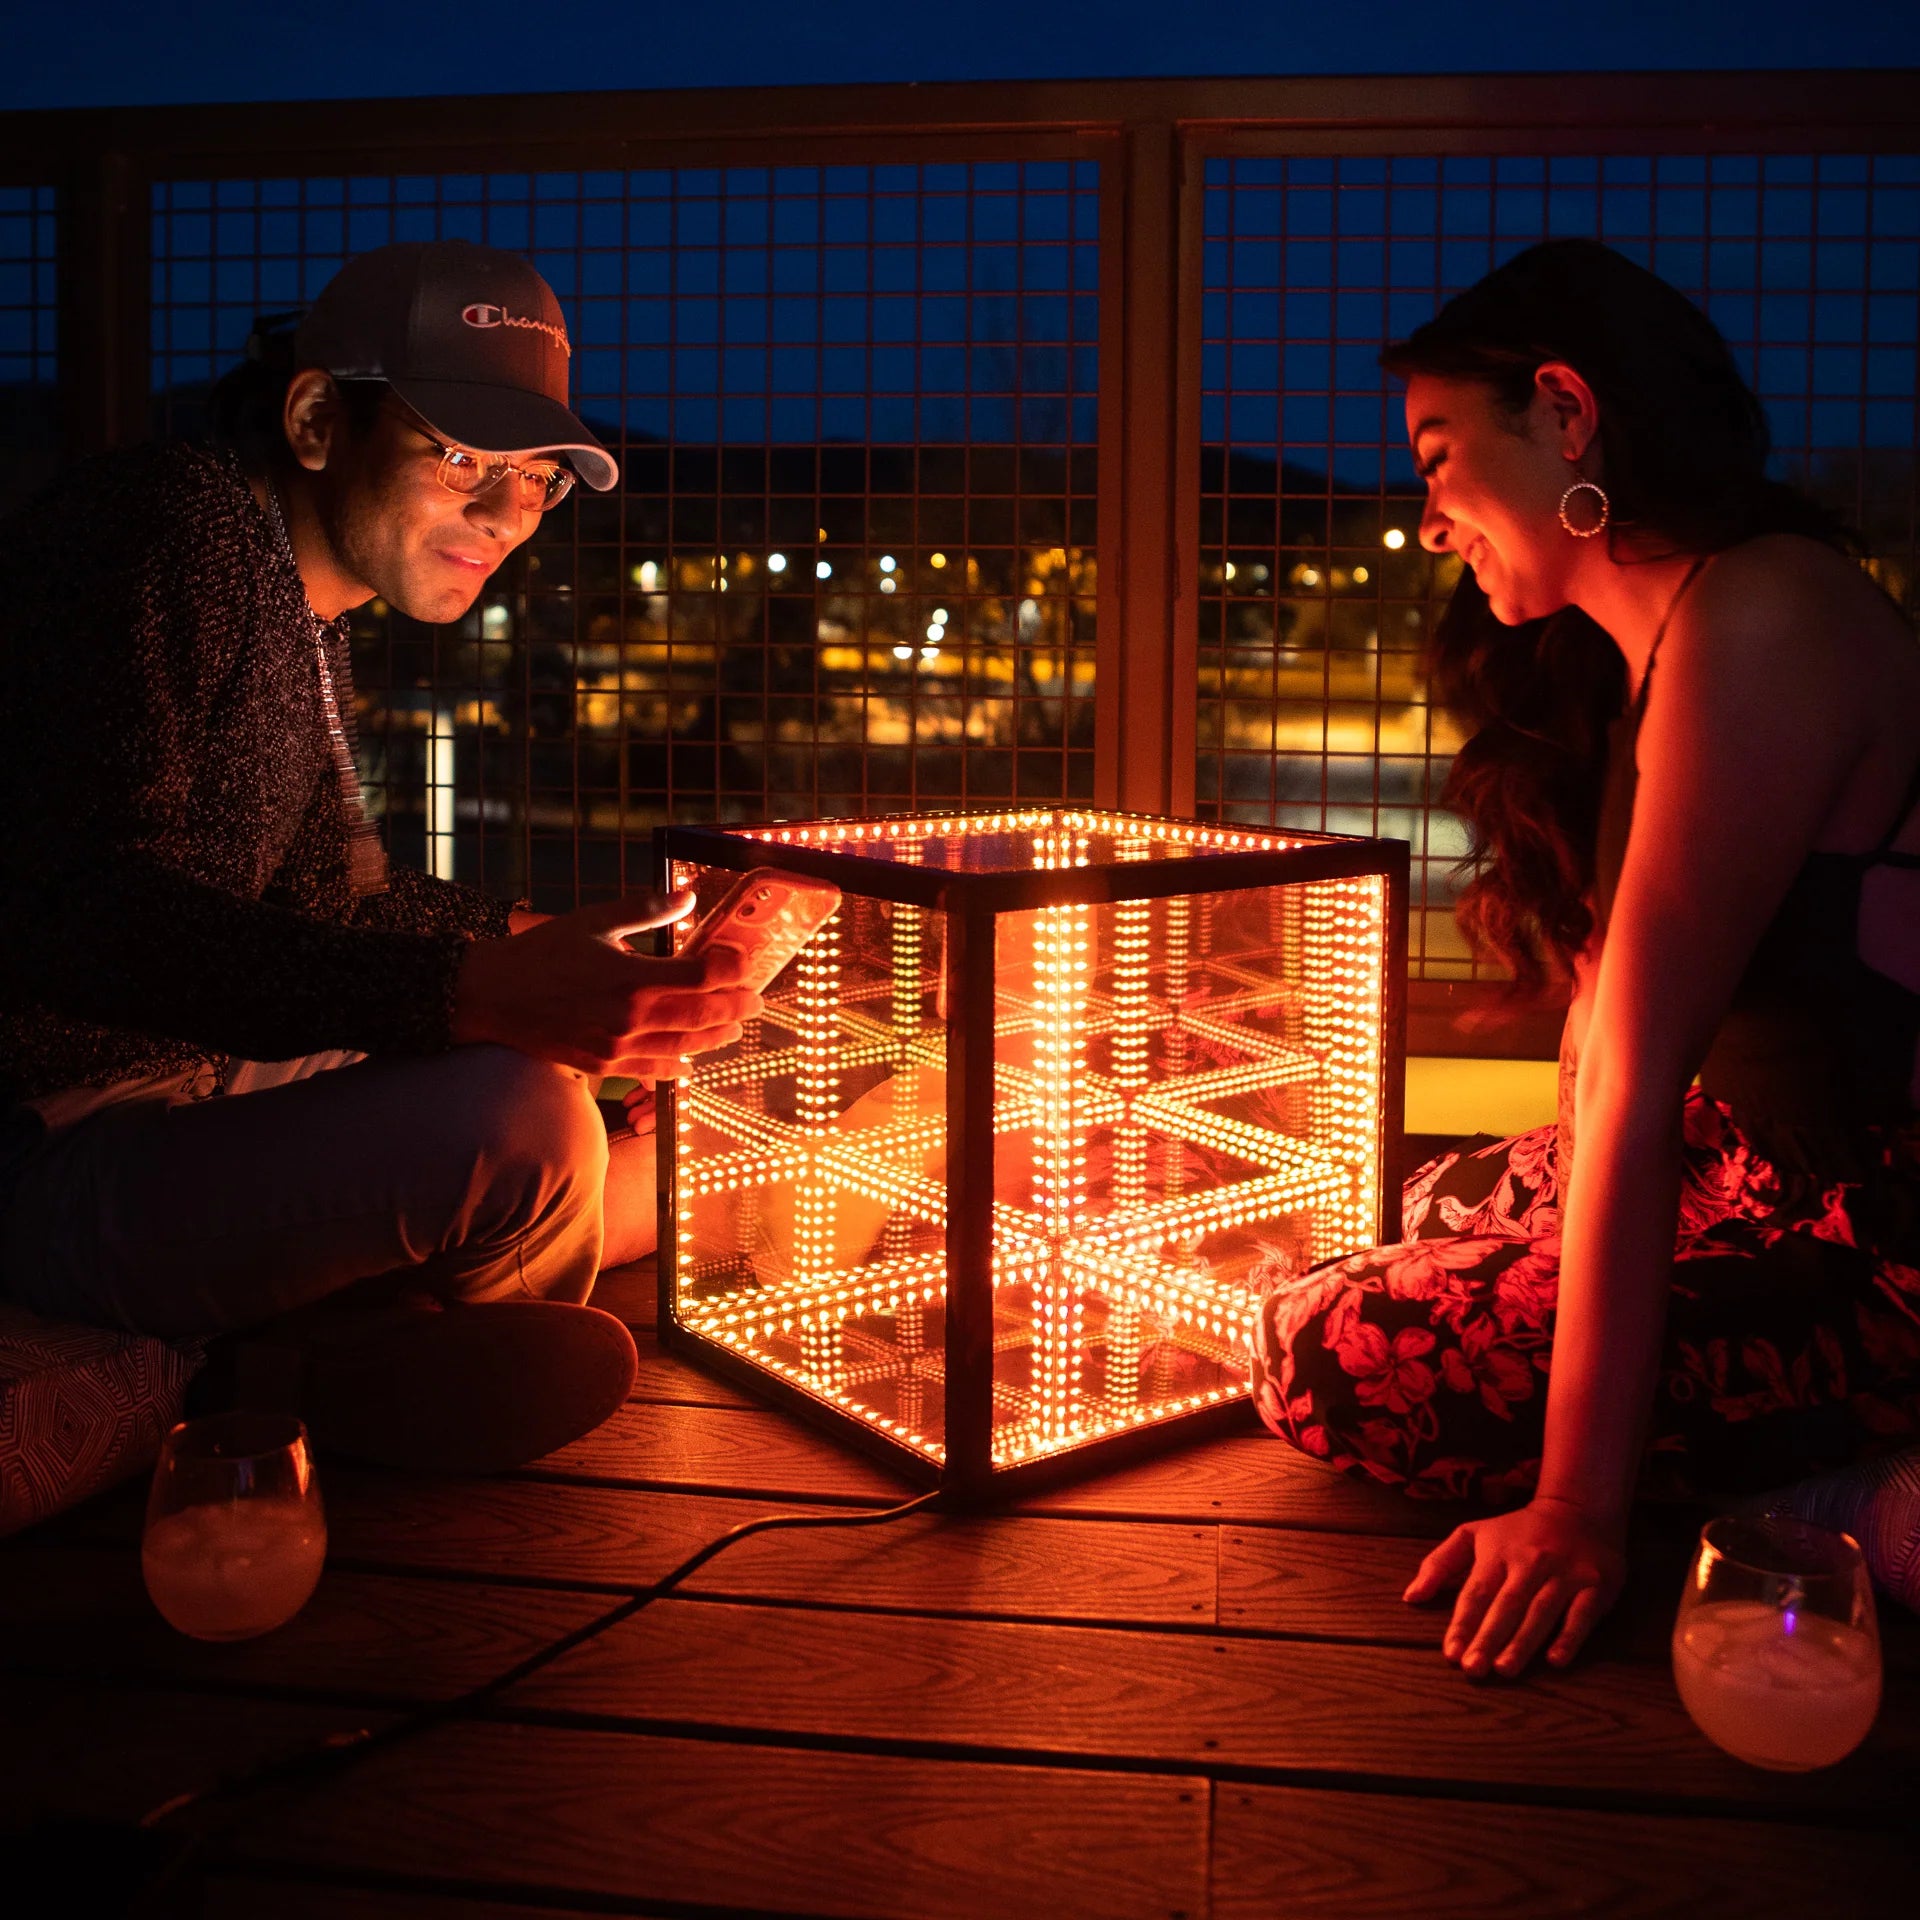 A woman and a man sitting on a wooden deck illuminated by colorful Halloween lights